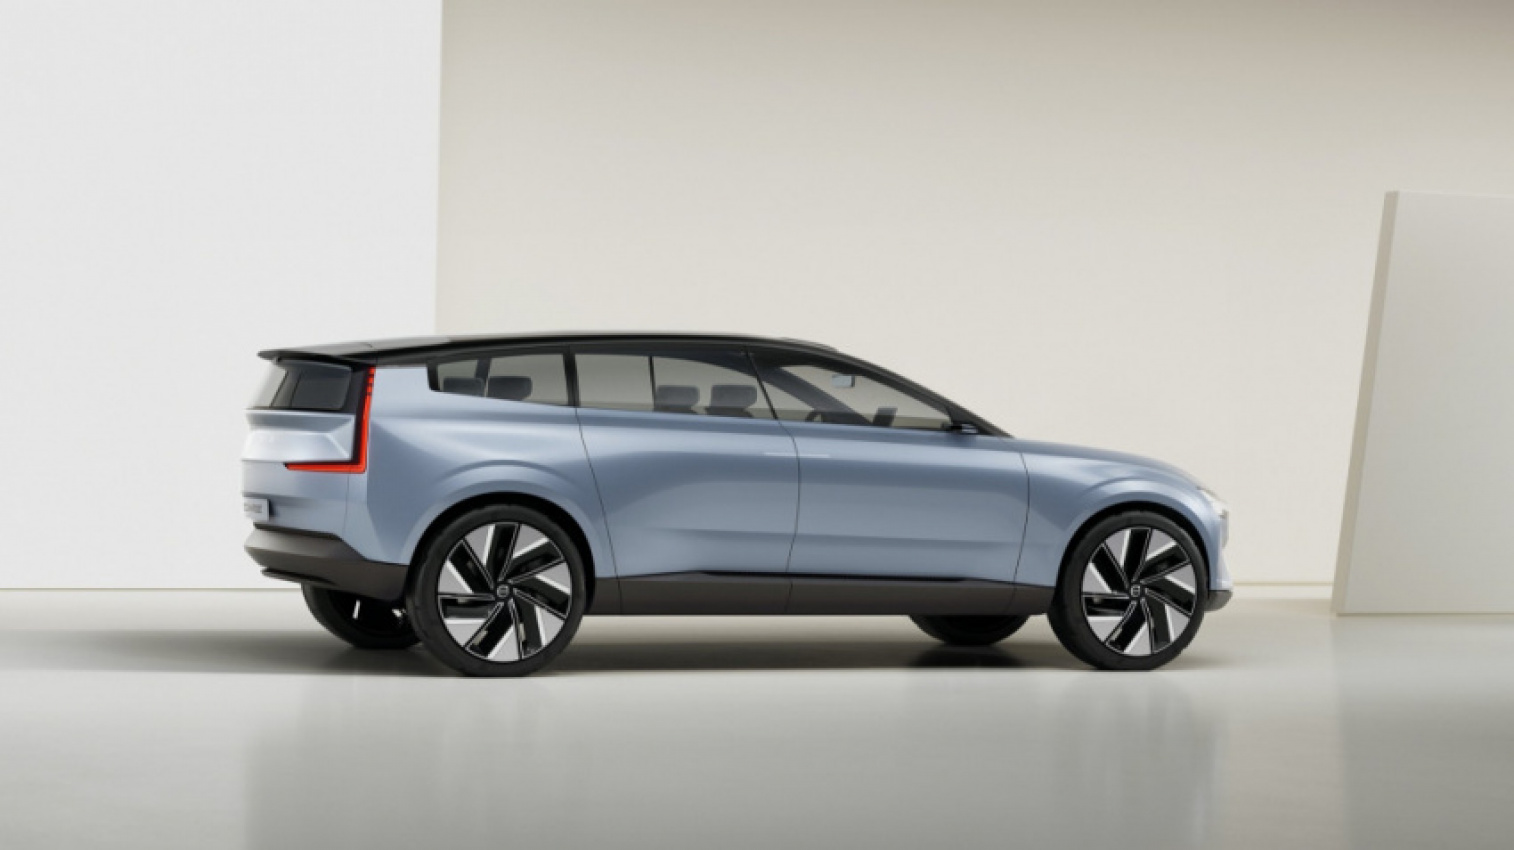 autos, cars, volvo, electric cars, luxury cars, suvs, volvo news, volvo xc90, volvo xc90 news, current volvo xc90 to remain on sale after electric successor arrives